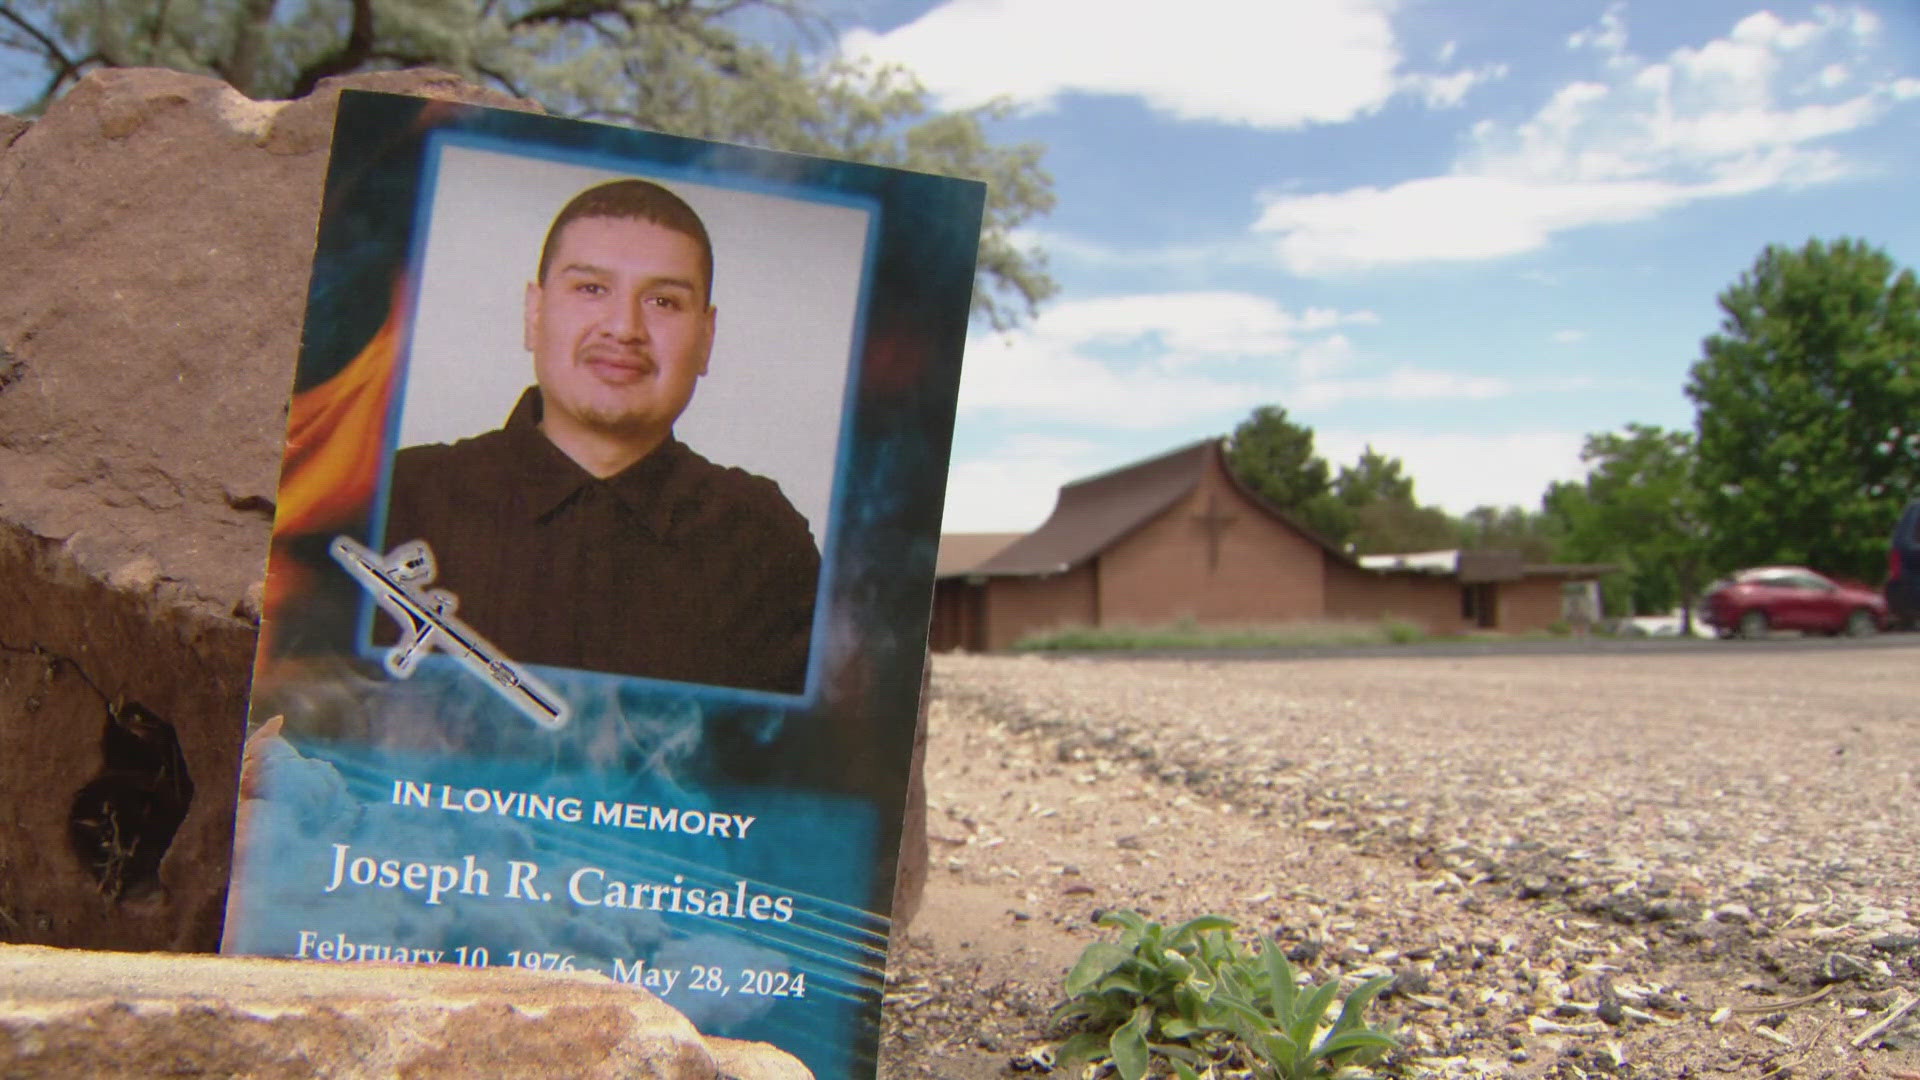 Joseph Carrisales was laid to rest this morning after he died during the hailstorm that pounded northern Colorado last week.